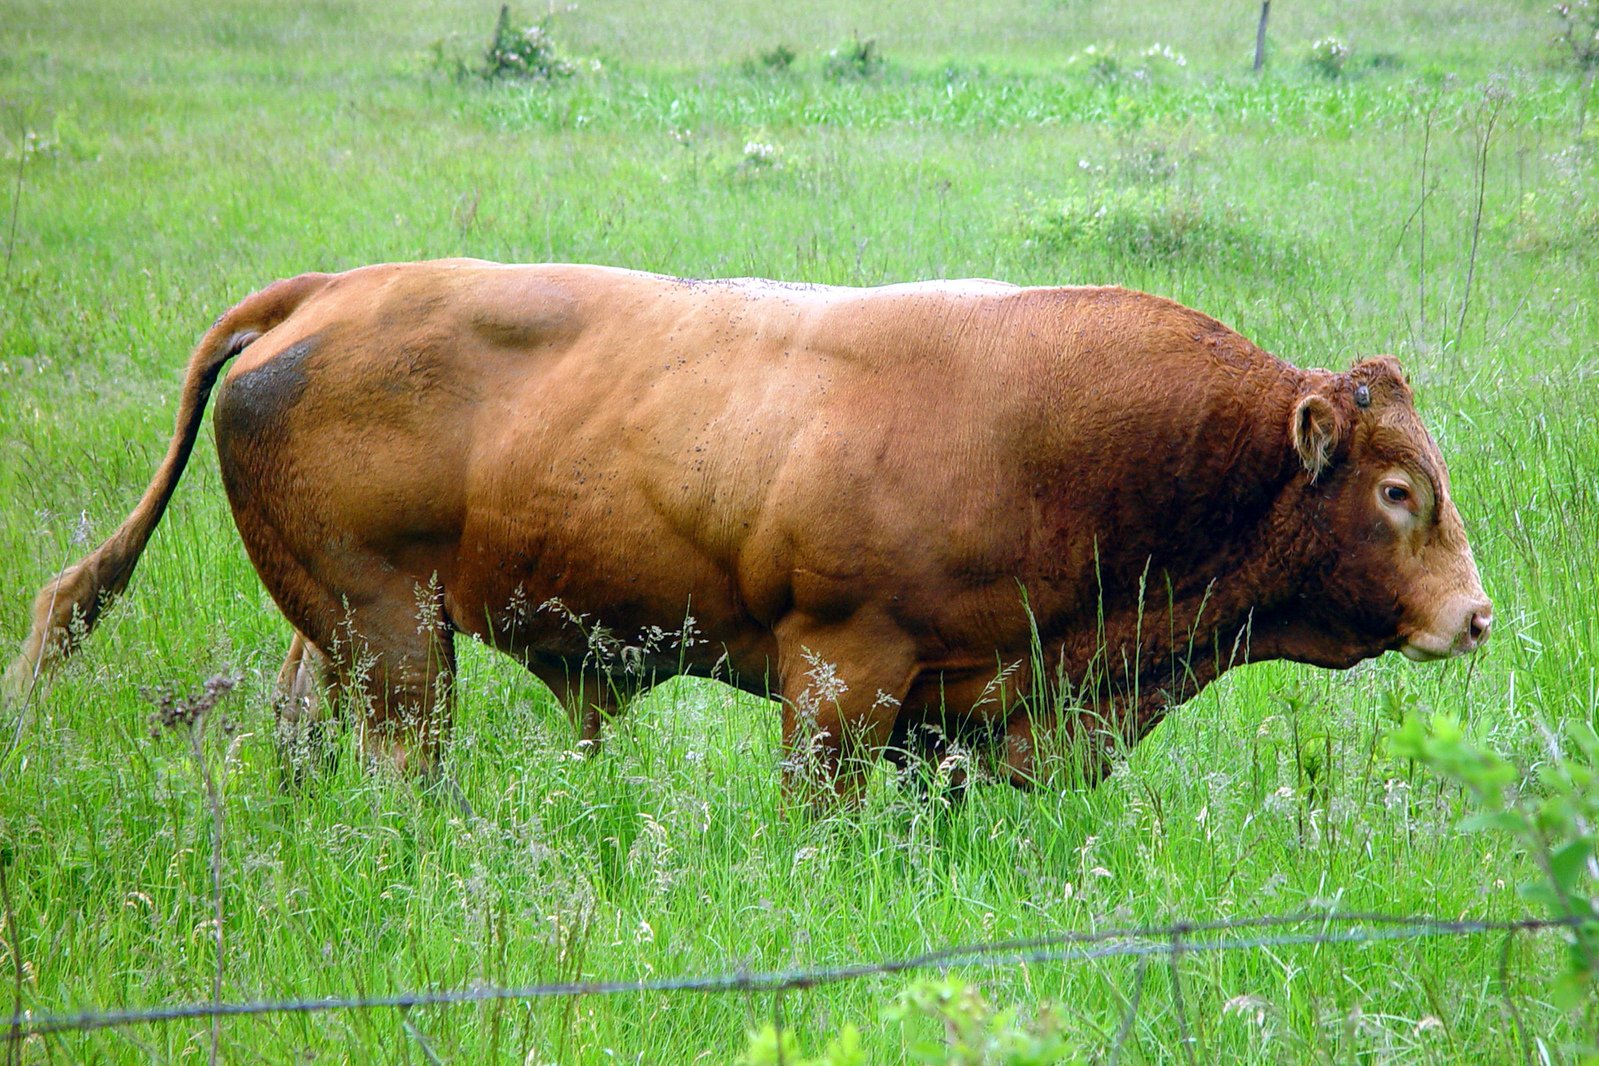 brown cow standing in the grass near a wire fence